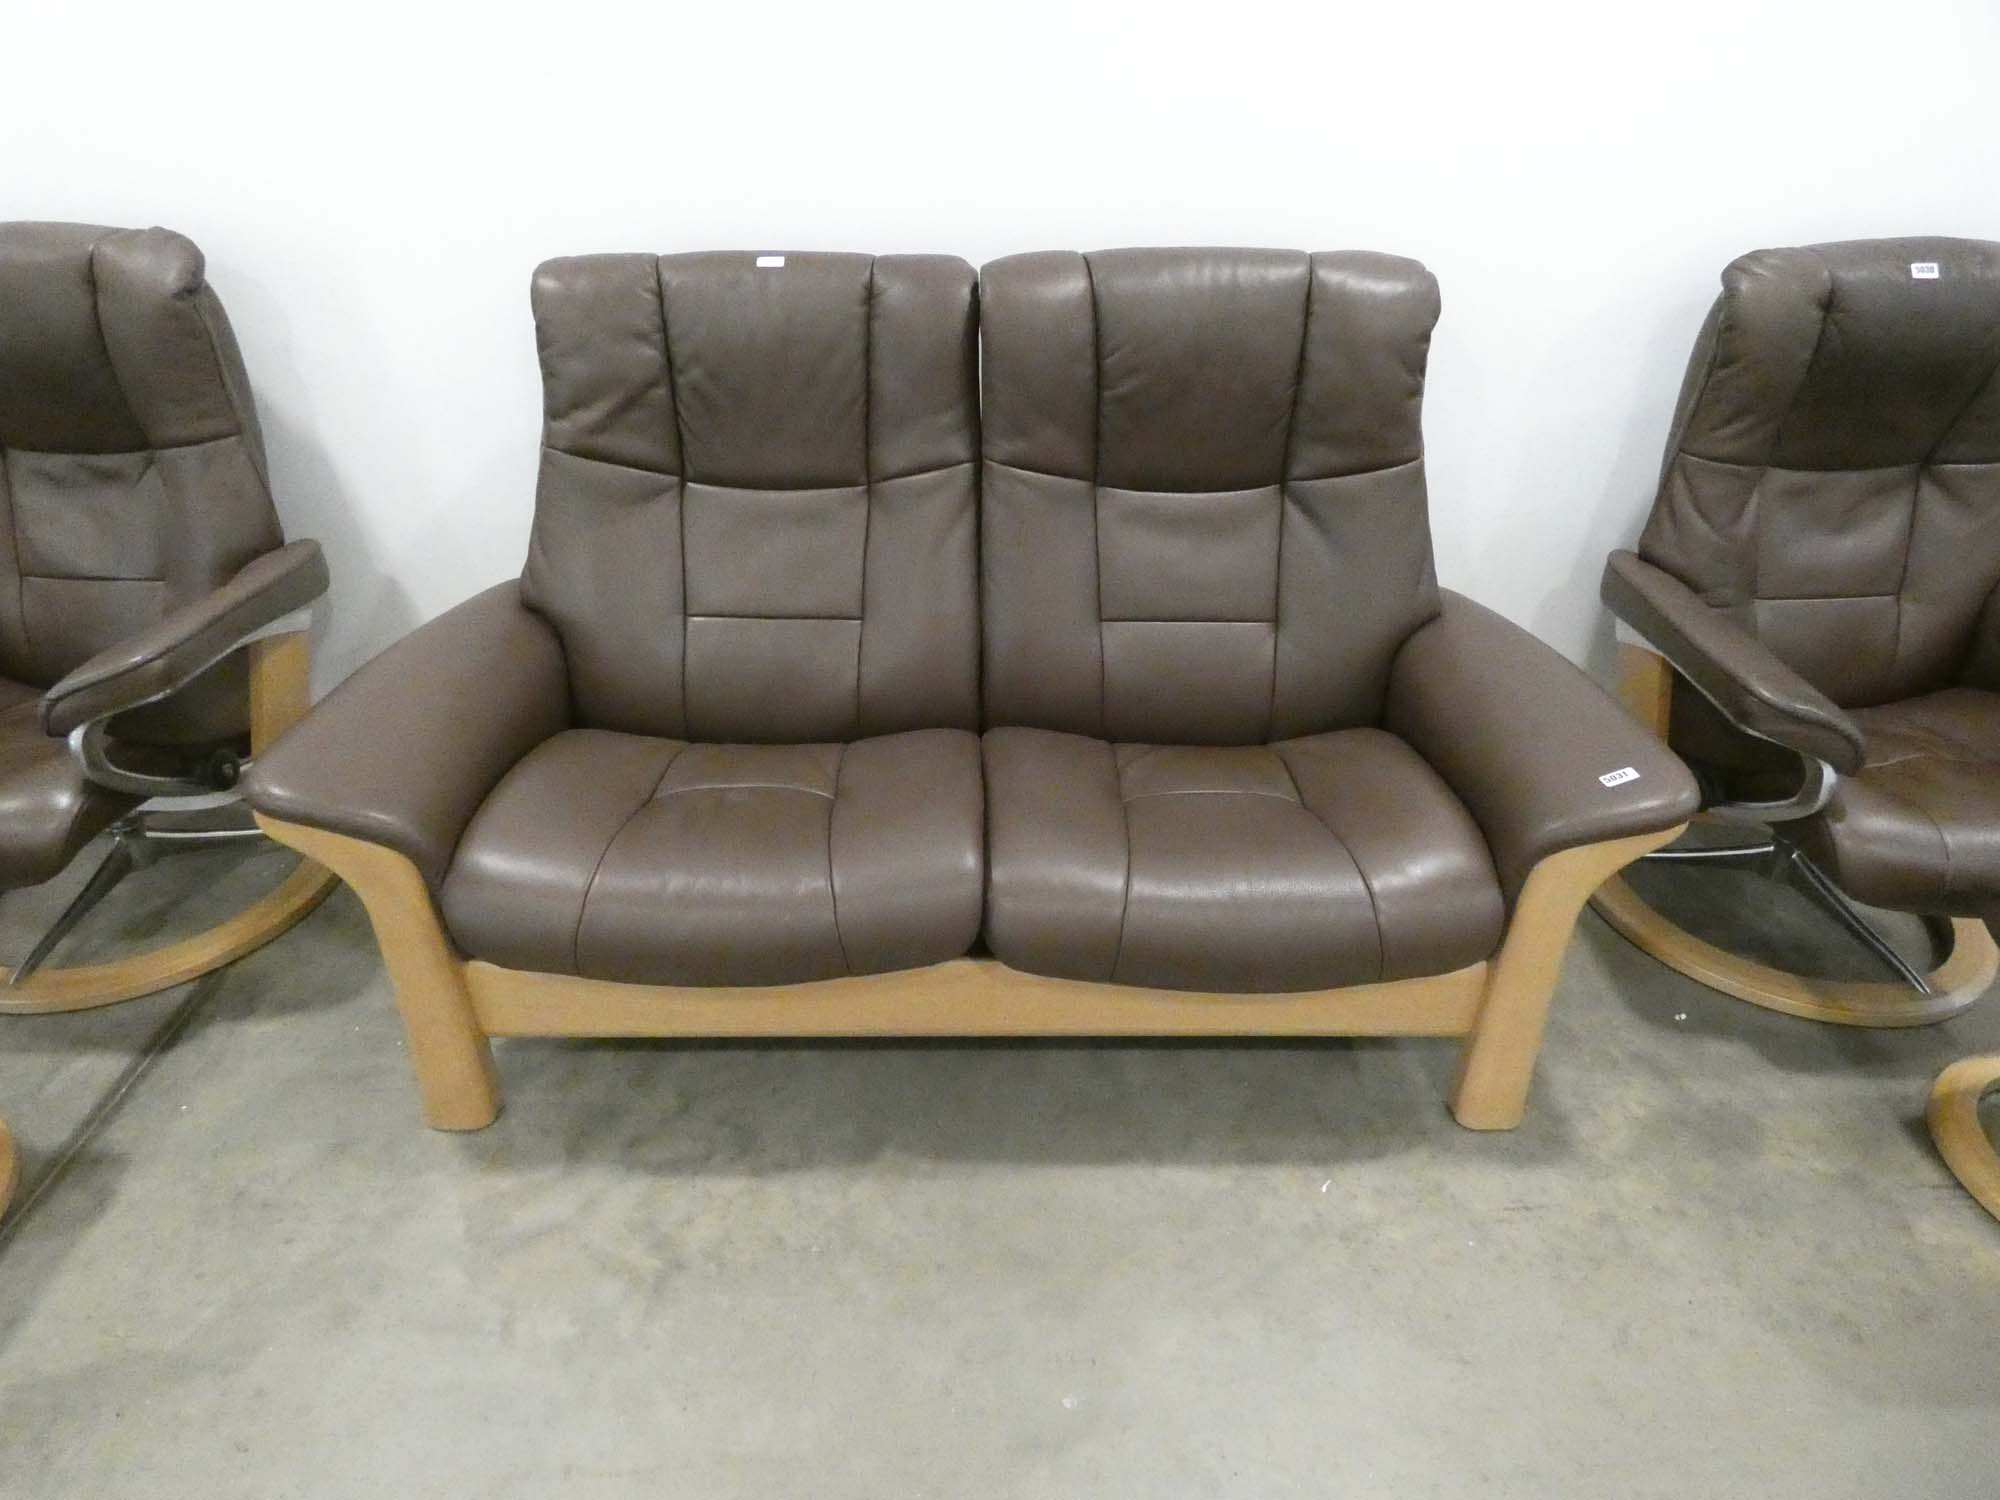 Two seater Stressless cinema reclining sofa in brown leather